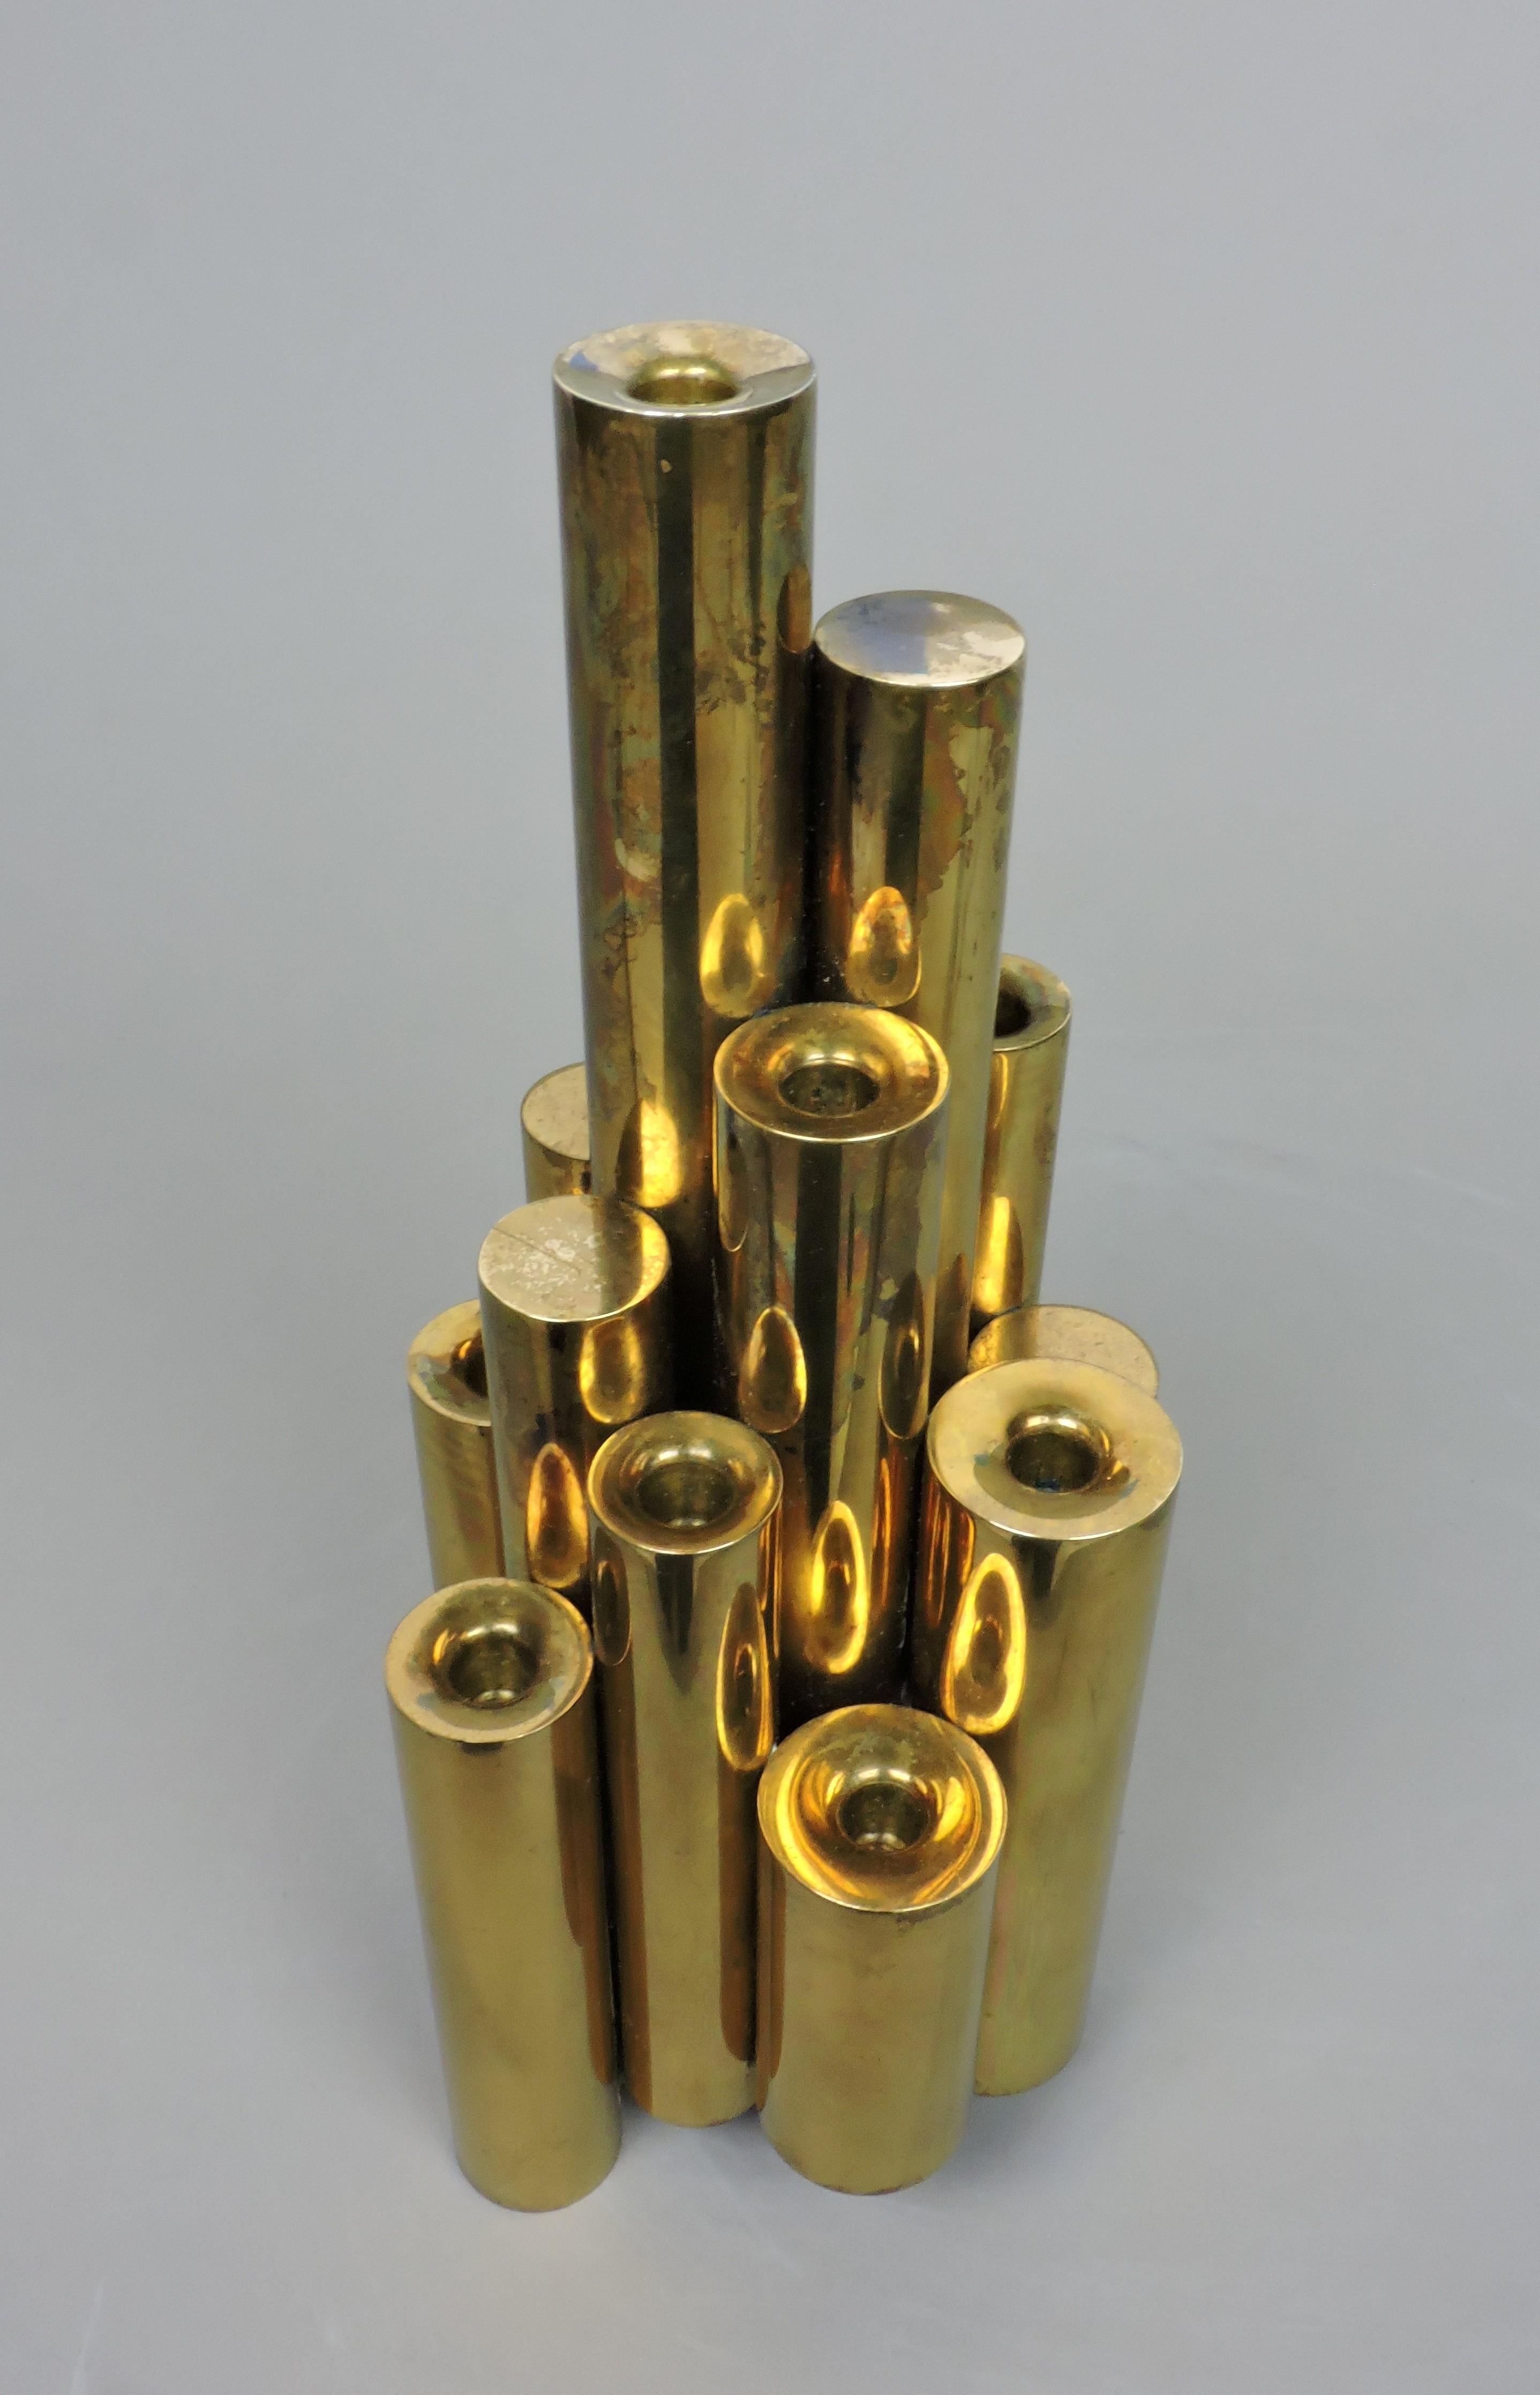 Beautiful solid brass candle holder attributed to Gio Ponti. This candle holder consists of thirteen tubular forms of various heights and holds nine candles.